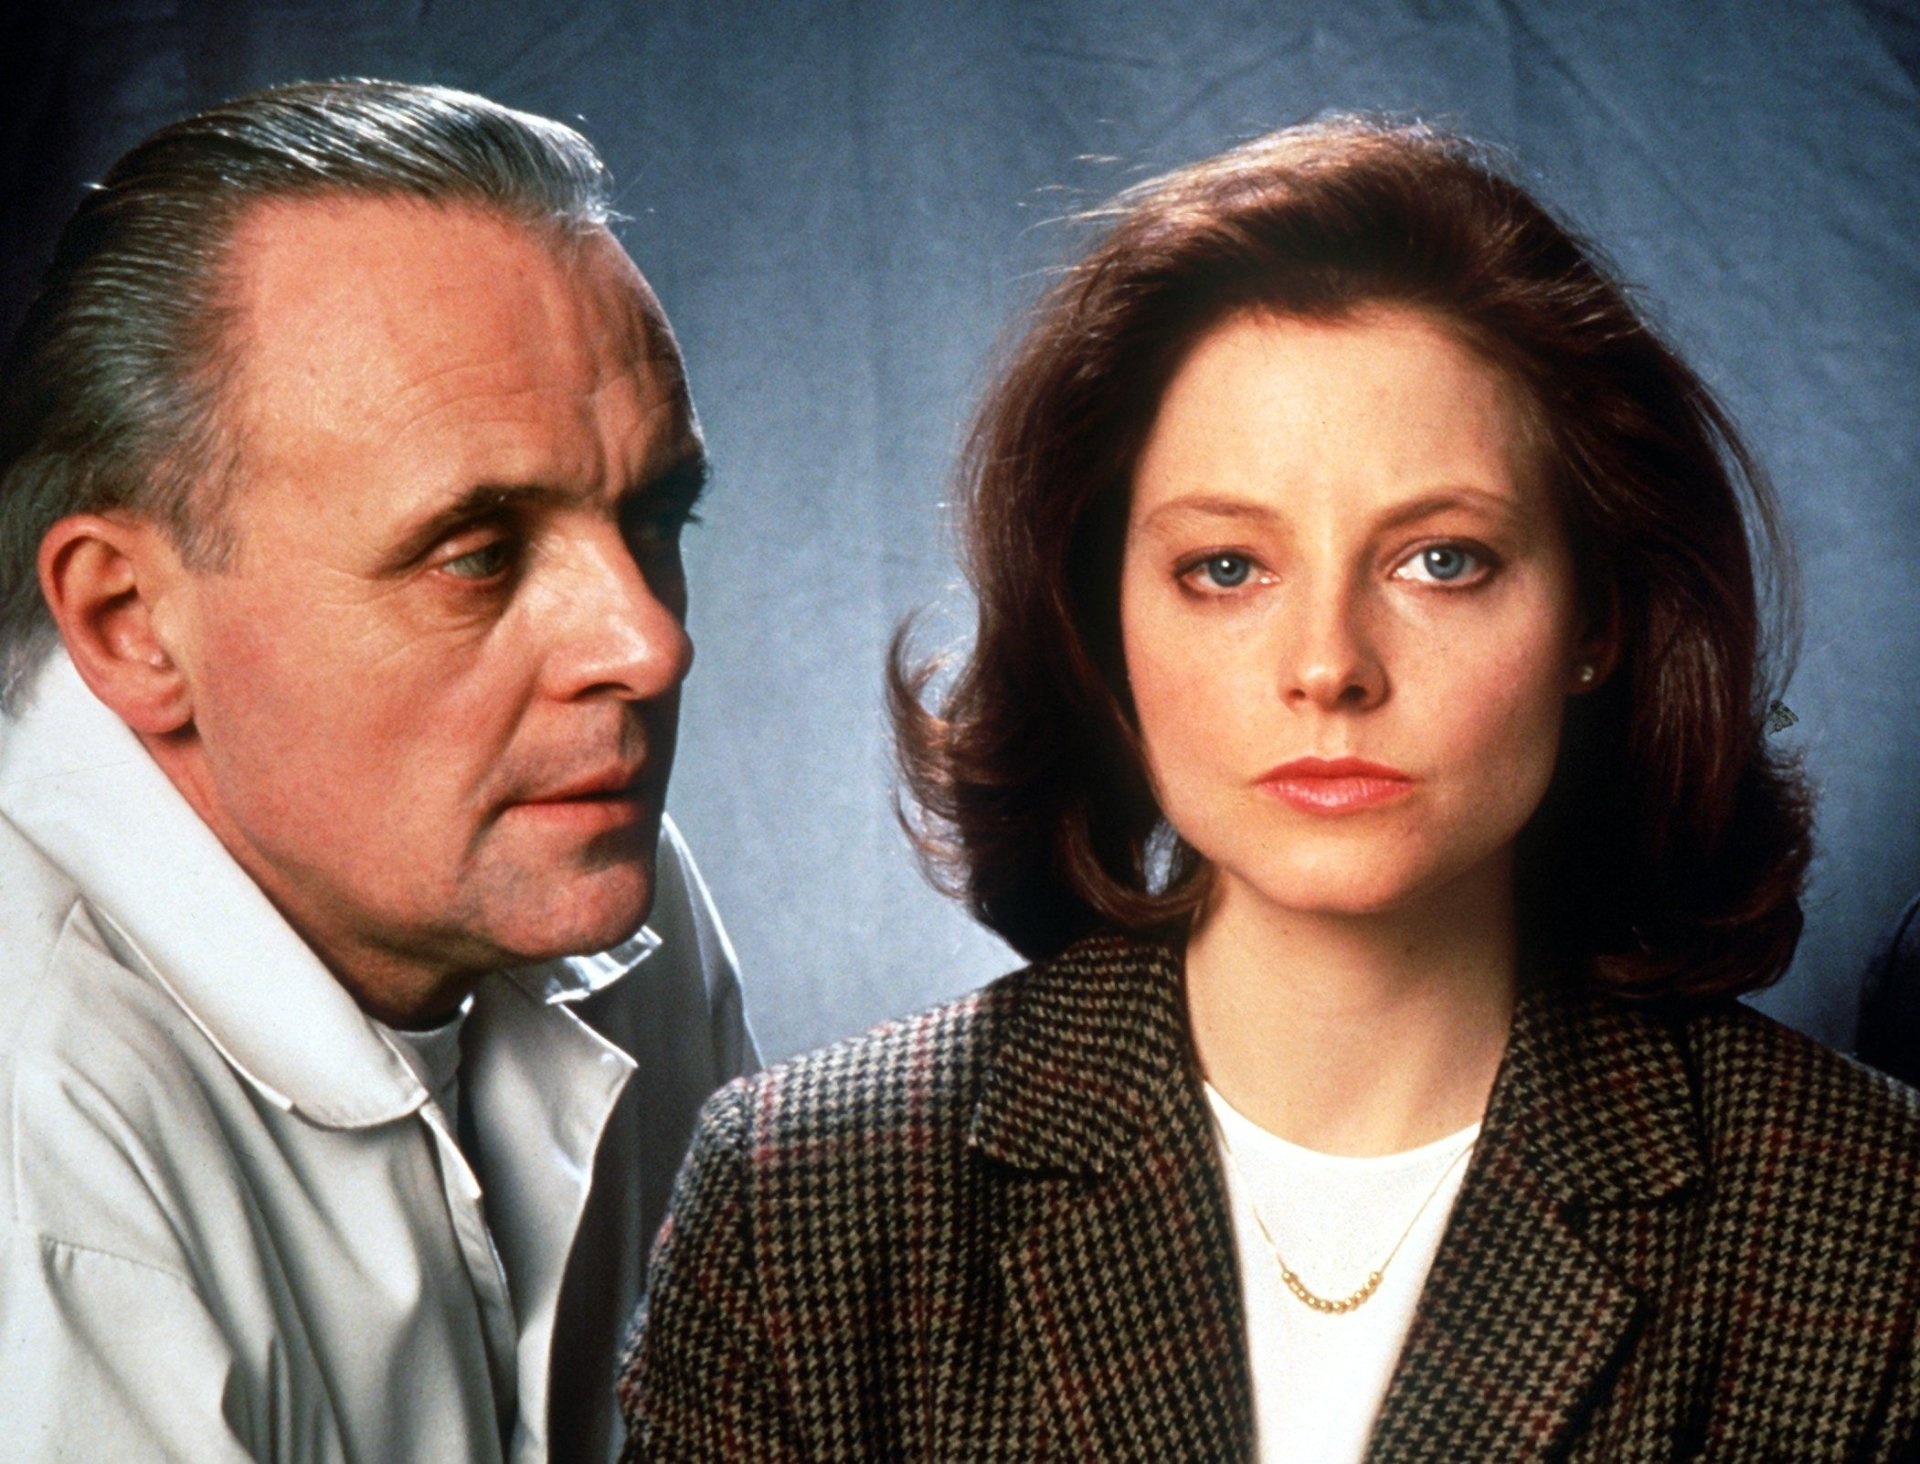 Anthony Hopkins, Clarice Starling, HD wallpapers, Iconic role, 1920x1470 HD Desktop